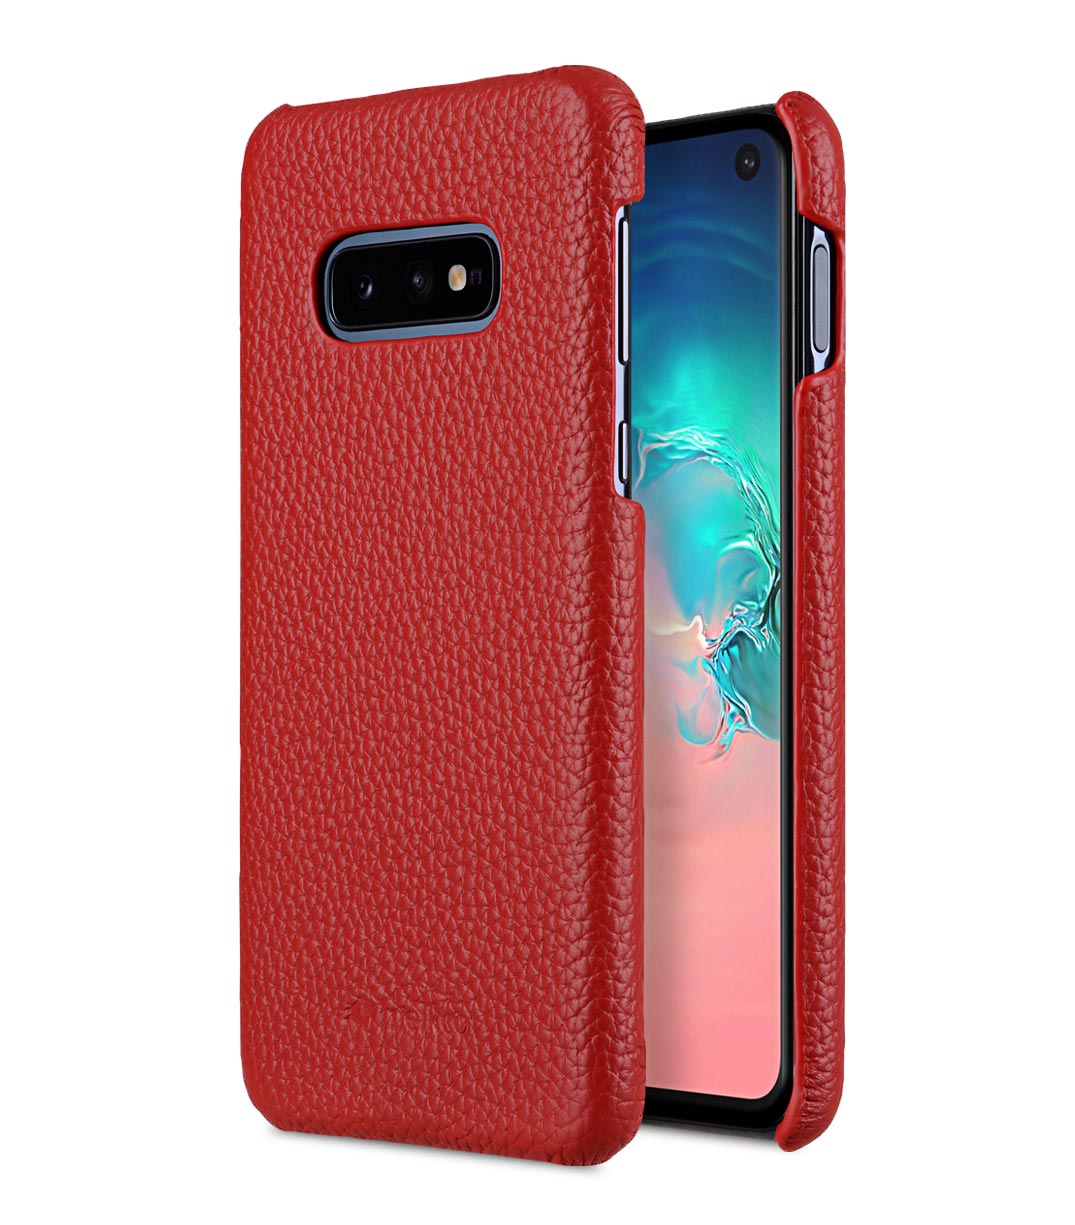 Melkco Back Snap Series Lai Chee Pattern Premium Leather Snap Cover Case for Samsung Galaxy S10e - ( Red LC )